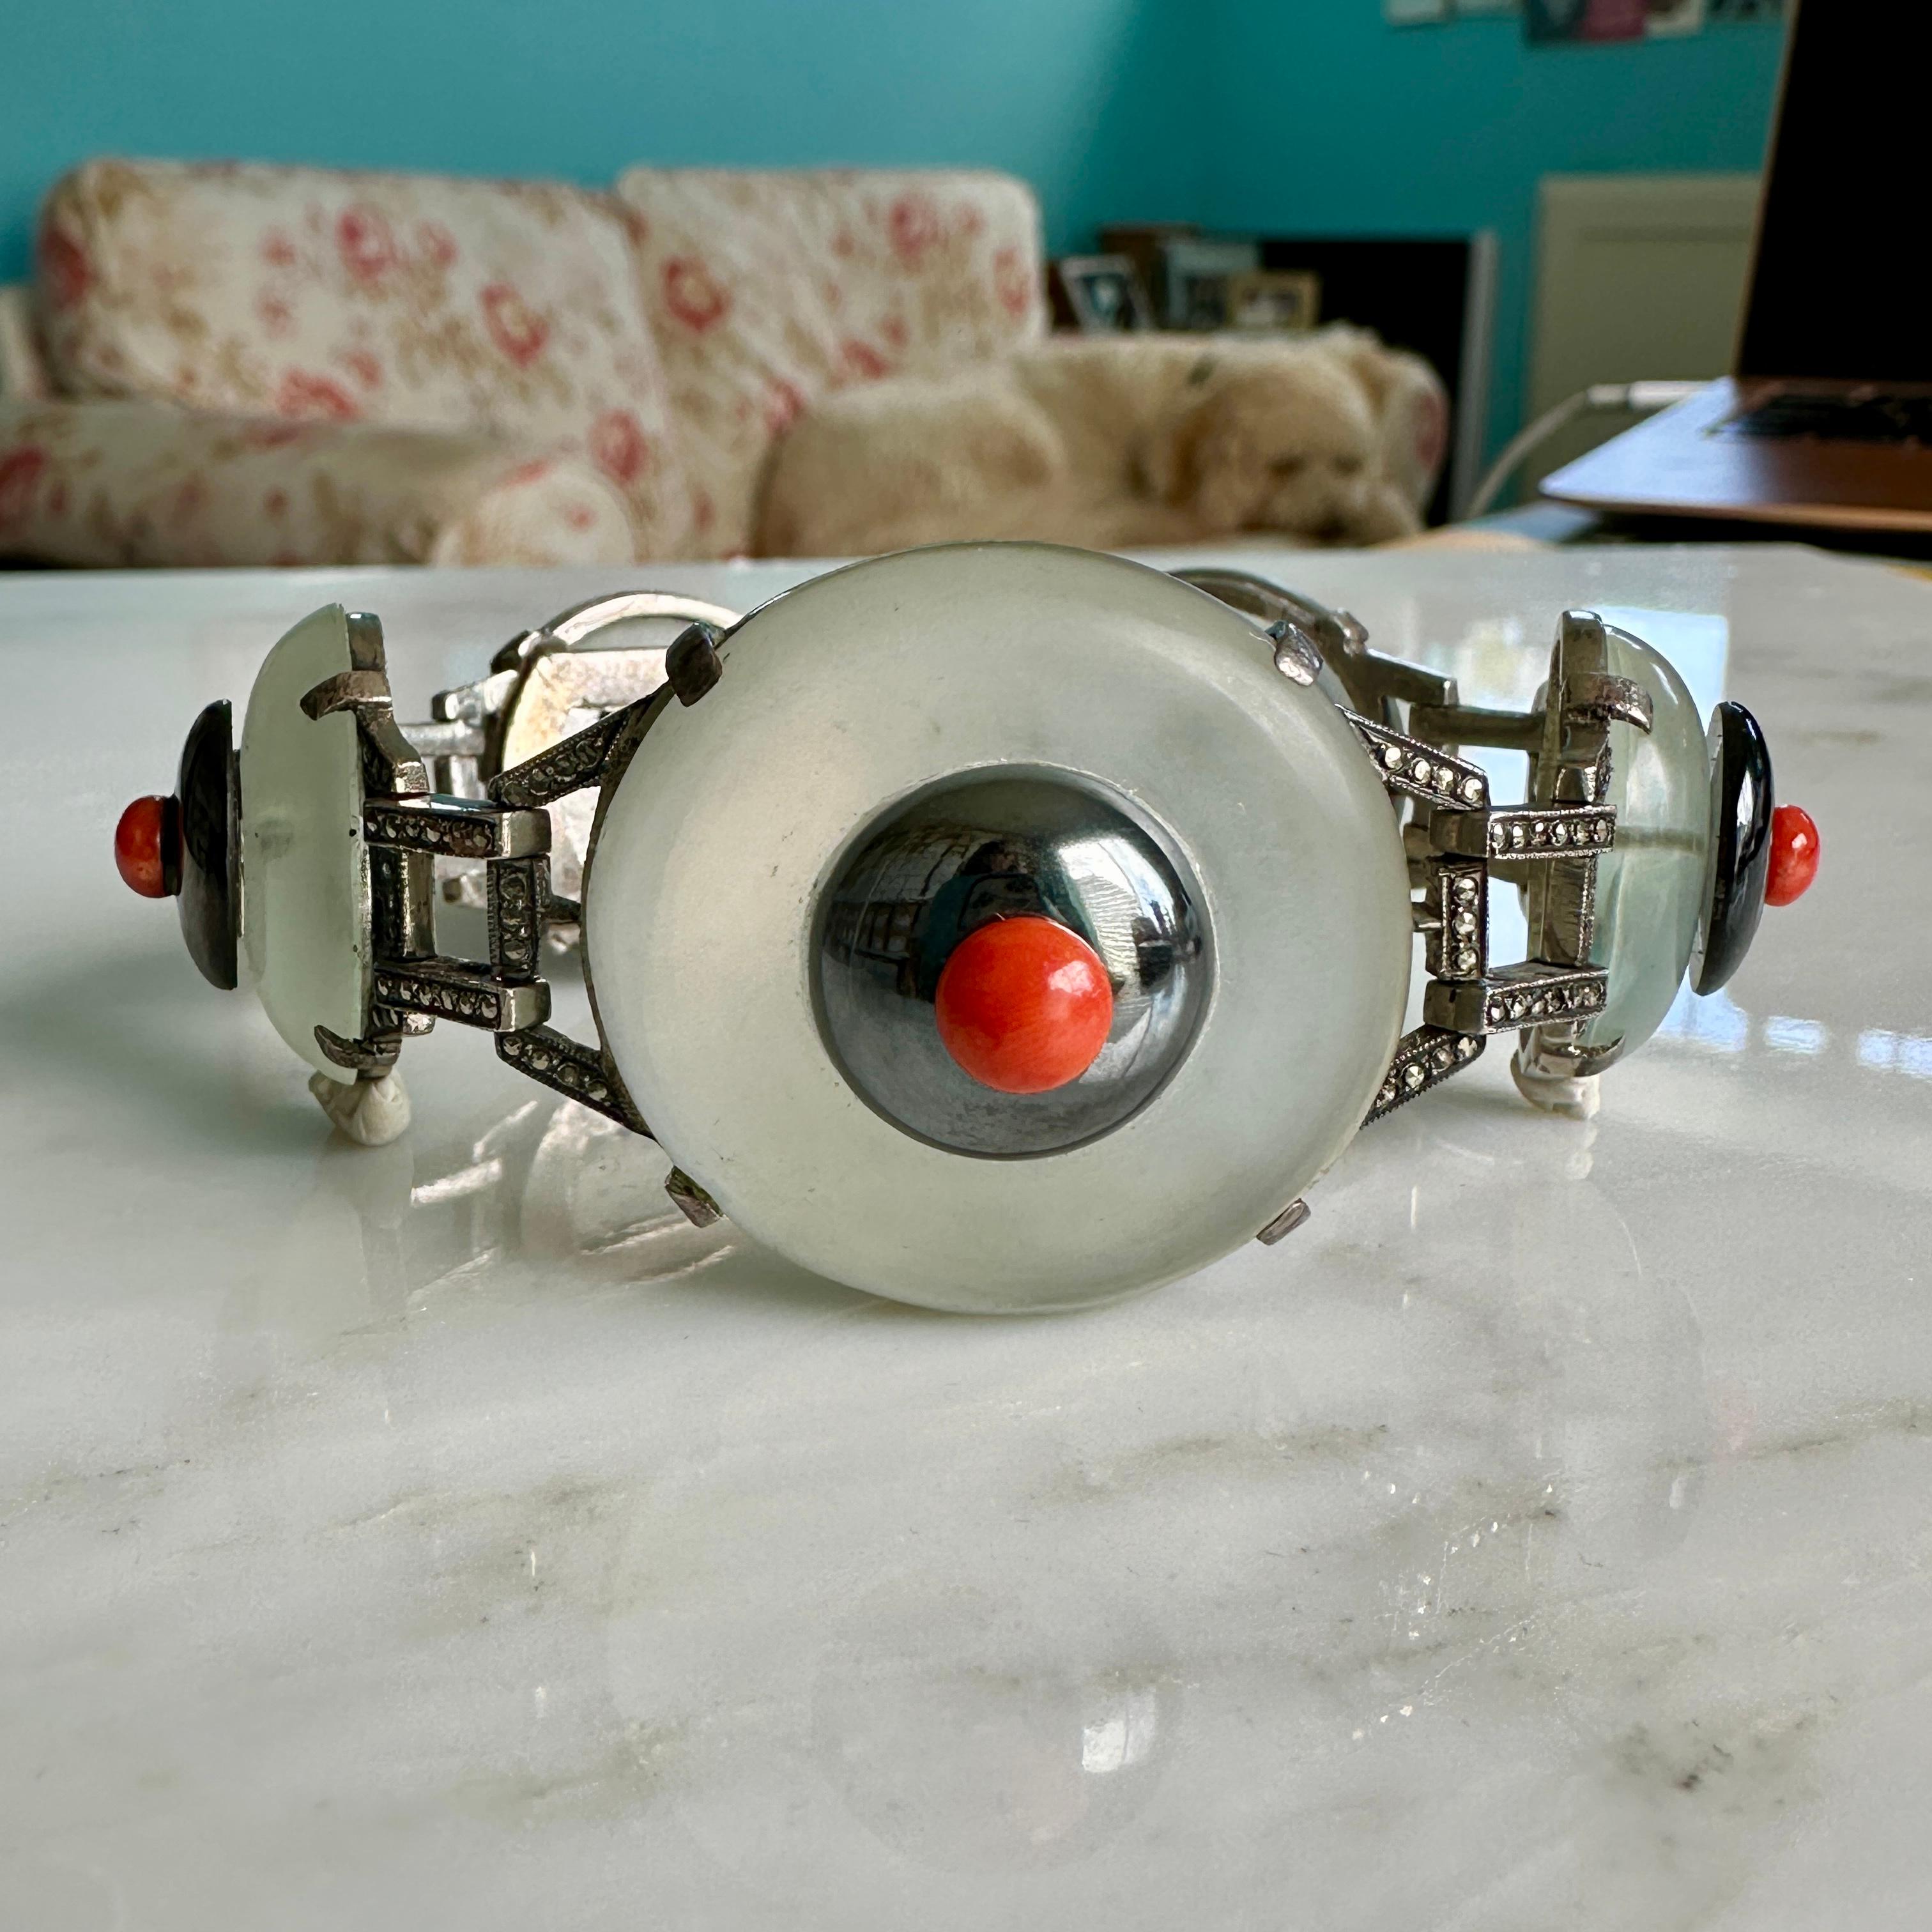 Details:
An RARE antique Art Deco beauty! Truly stunning 1920's Art Deco rock crystal, hematite, red coral, marcasite and silver bracelet. It is a really unique piece! This piece has a nice weight to it, with 5 carved rock crystal half orbs prong